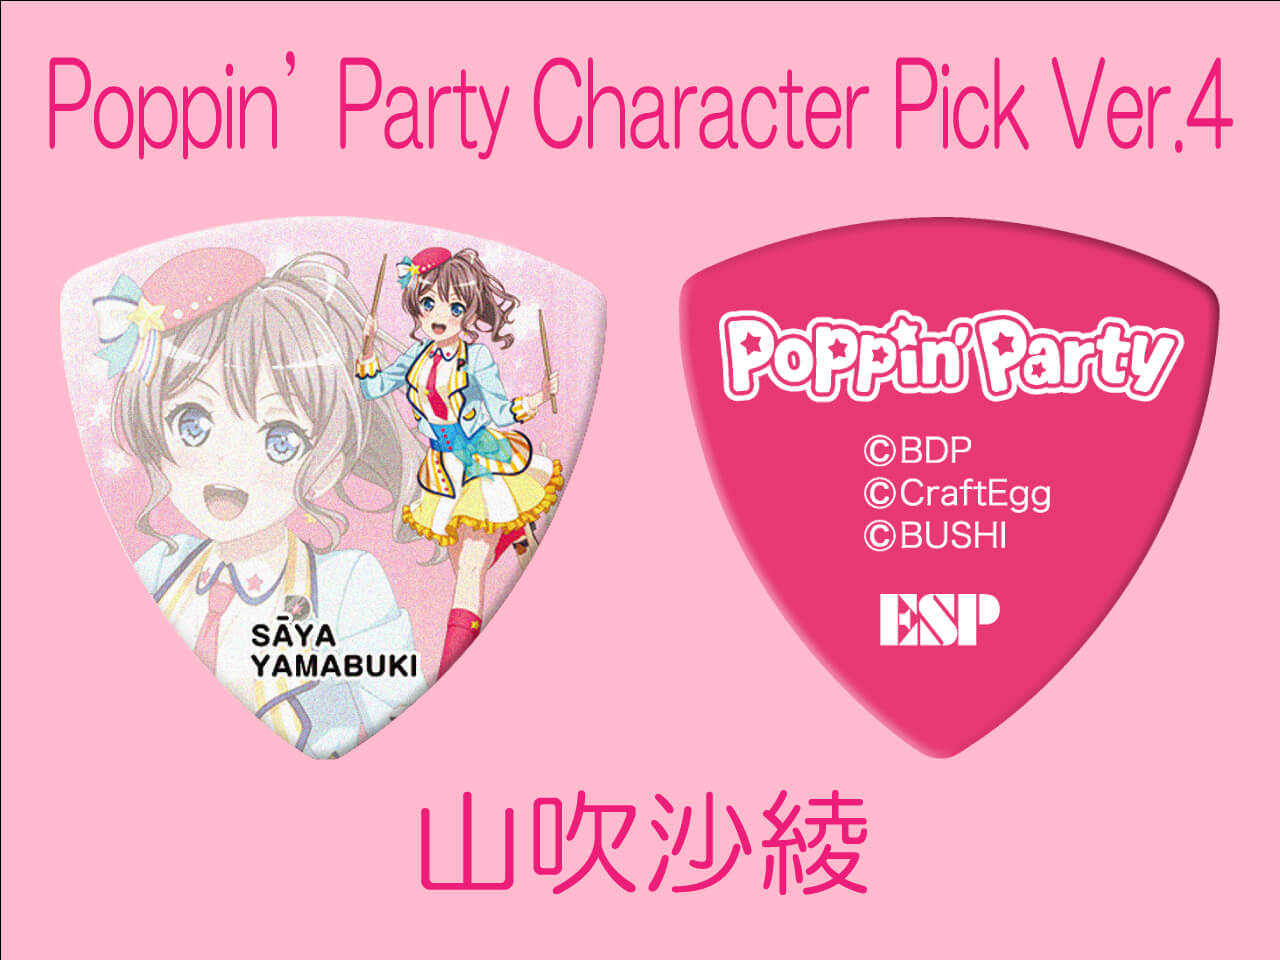 【ESP×BanG Dream!コラボピック】Poppin’Party Character Pick Ver.4 "山吹沙綾"（GBP Saya Poppin Party 4）＆”ハメパチ” セット